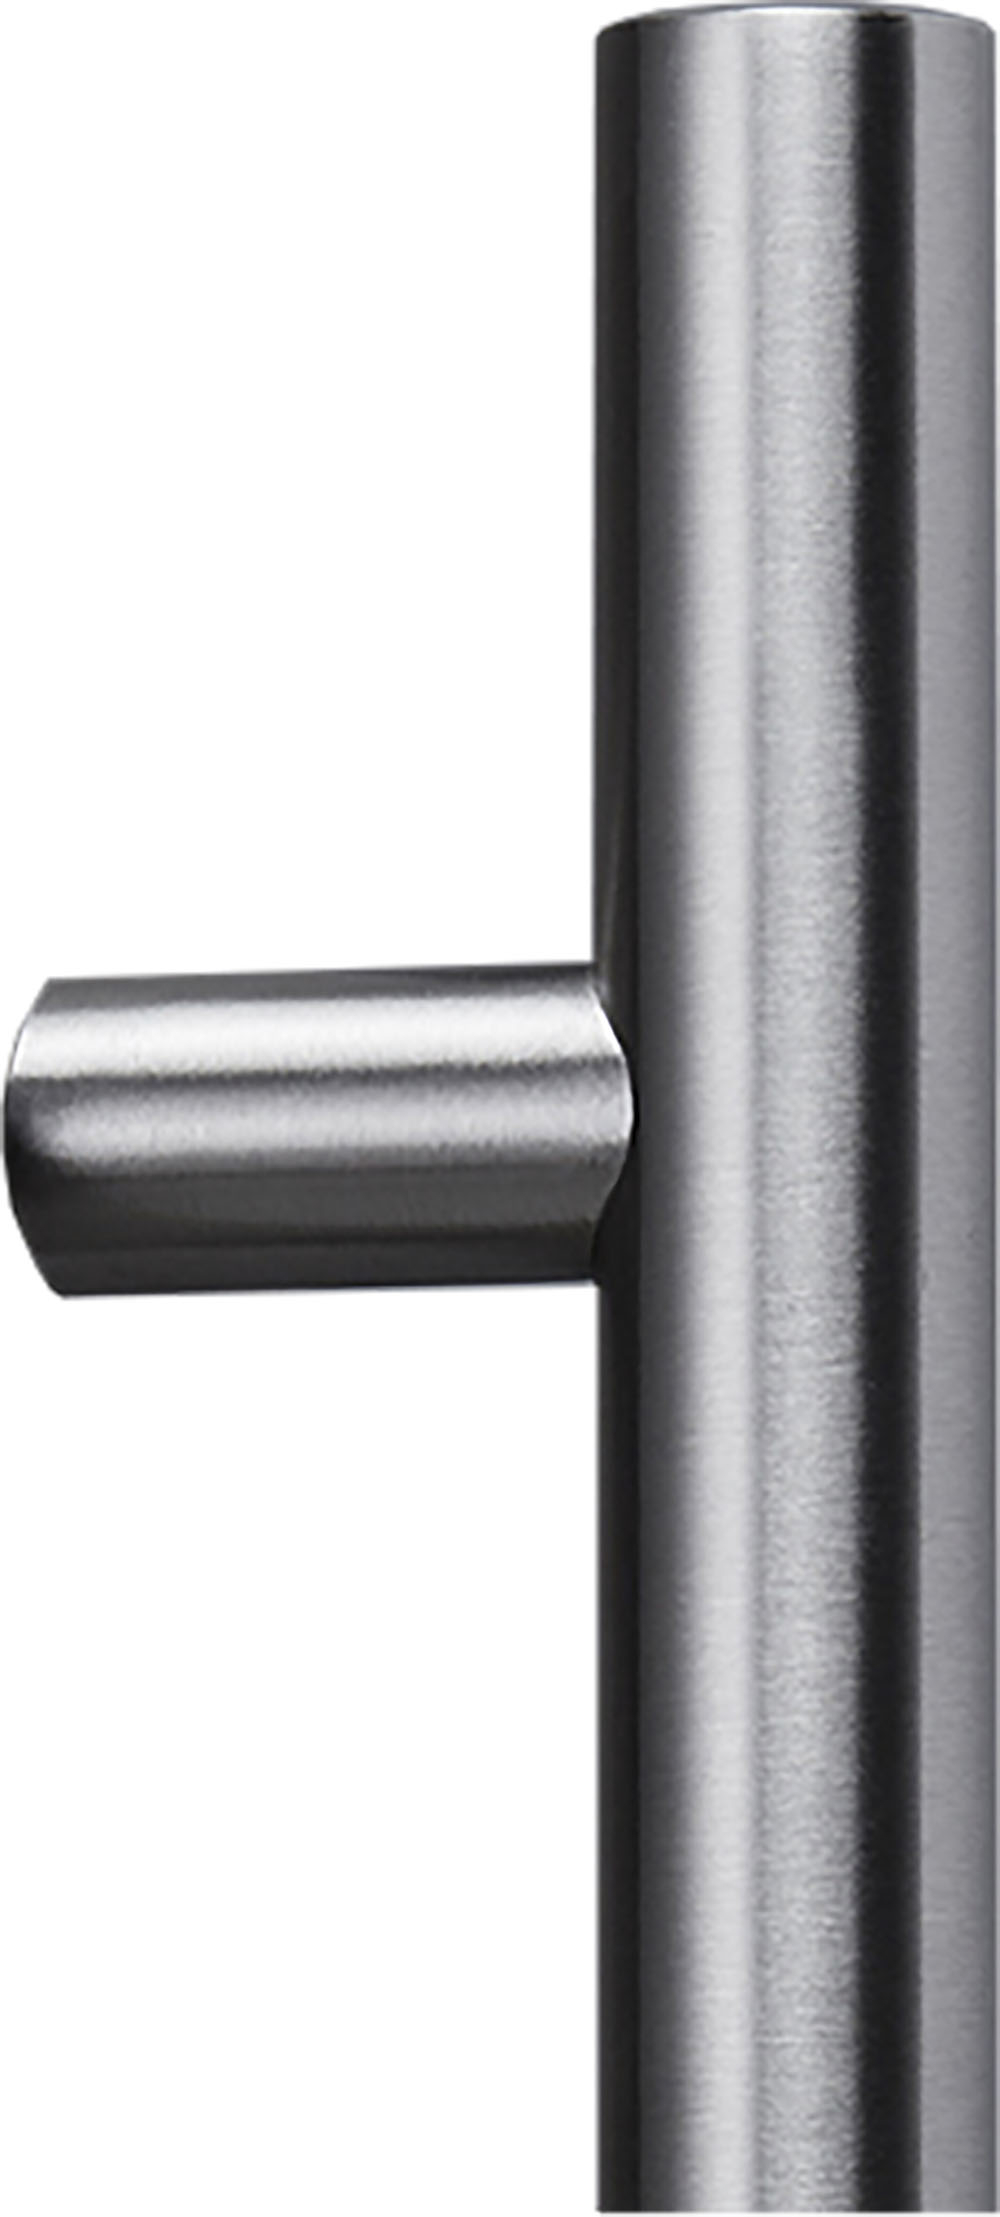 Angle View: Zephyr - Presrv Contemporary Handle Accessory for PRW and PRB Coolers - Stainless Steel